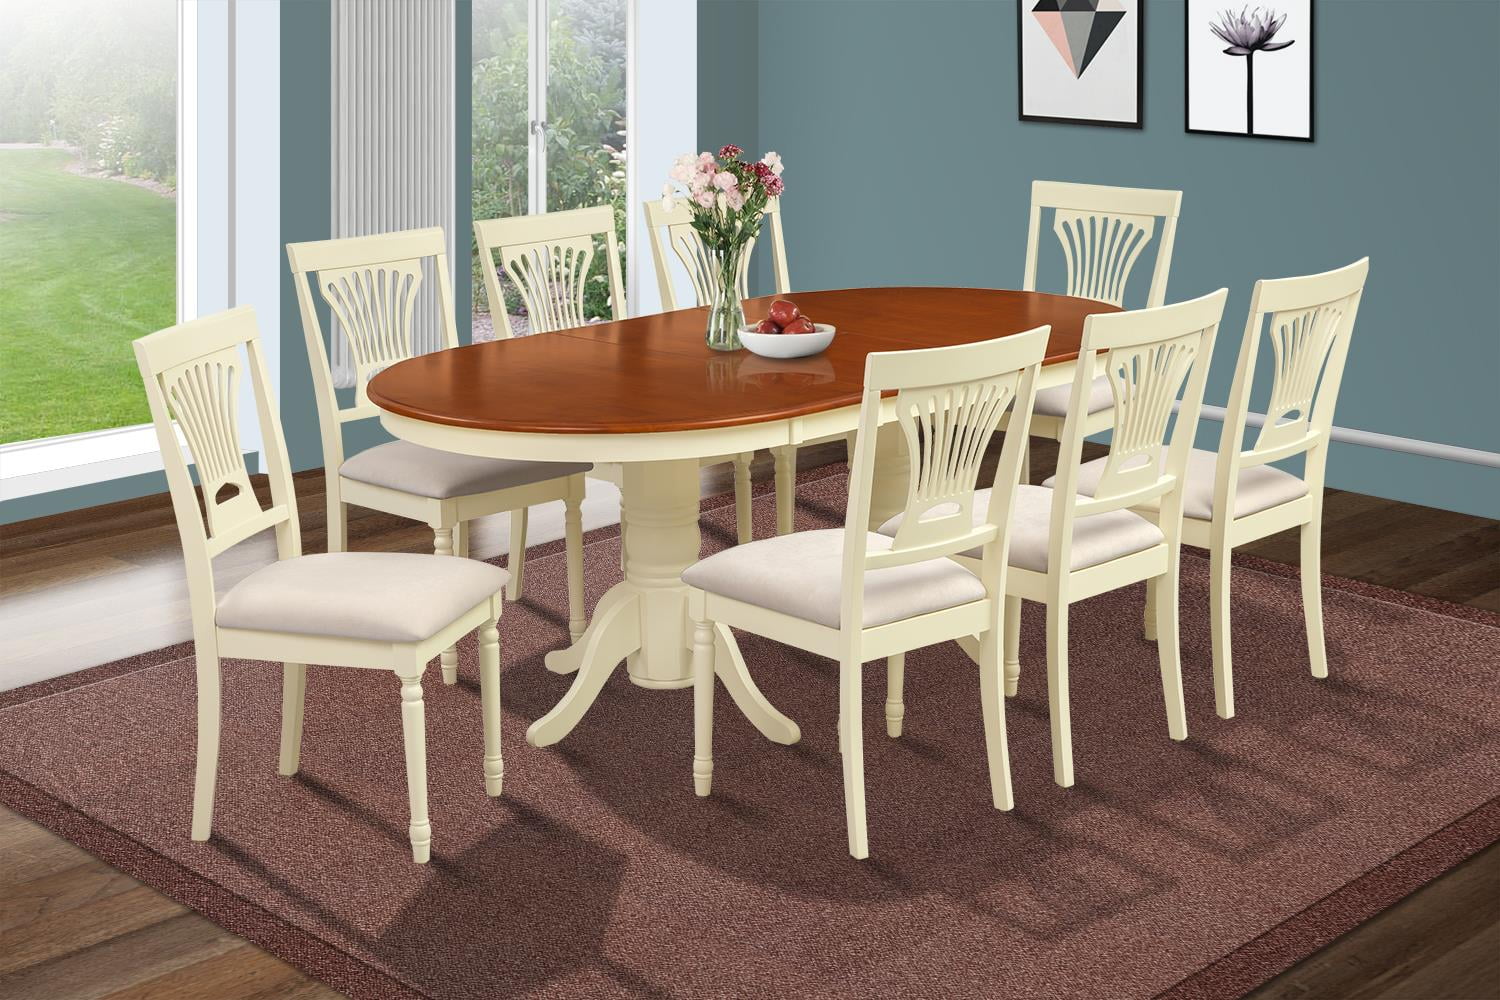 9 Piece Dining Room Set Table With A Butterfly Leaf And 8 Dining Chairs